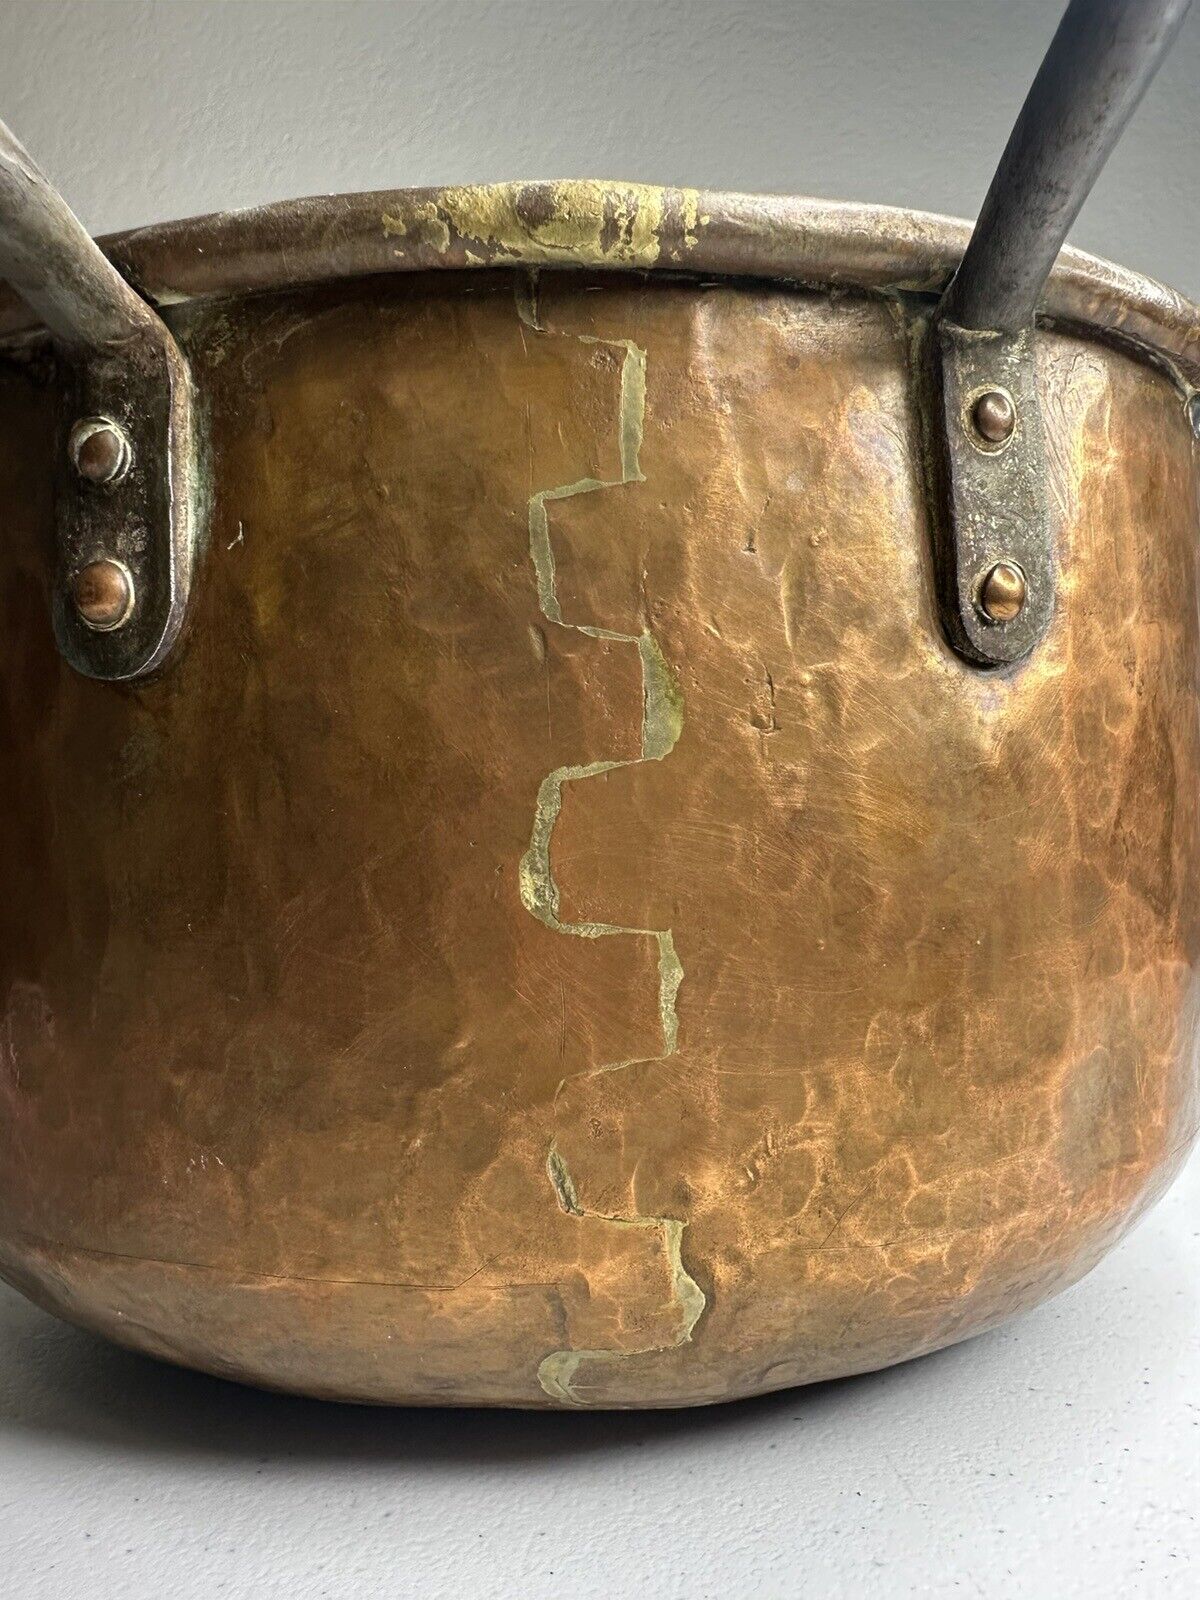 Antique Early 1800s Hand-Hammered French Copper Stew Pot with Dovetail Joints - 10.5" Vintage Cookware - TreasuTiques